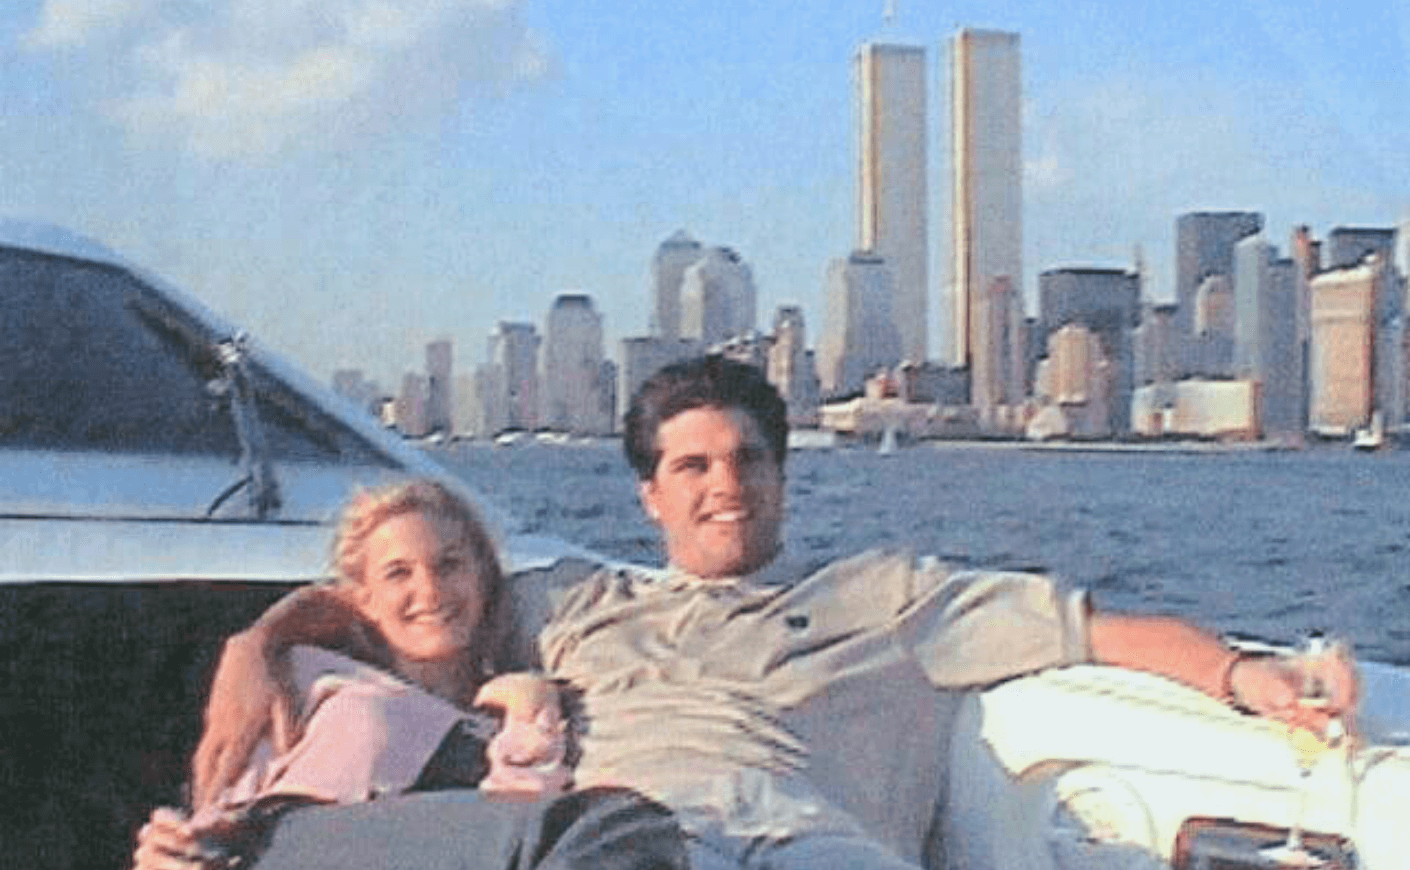 Fred and Annelise Peterson on a boat 9/11